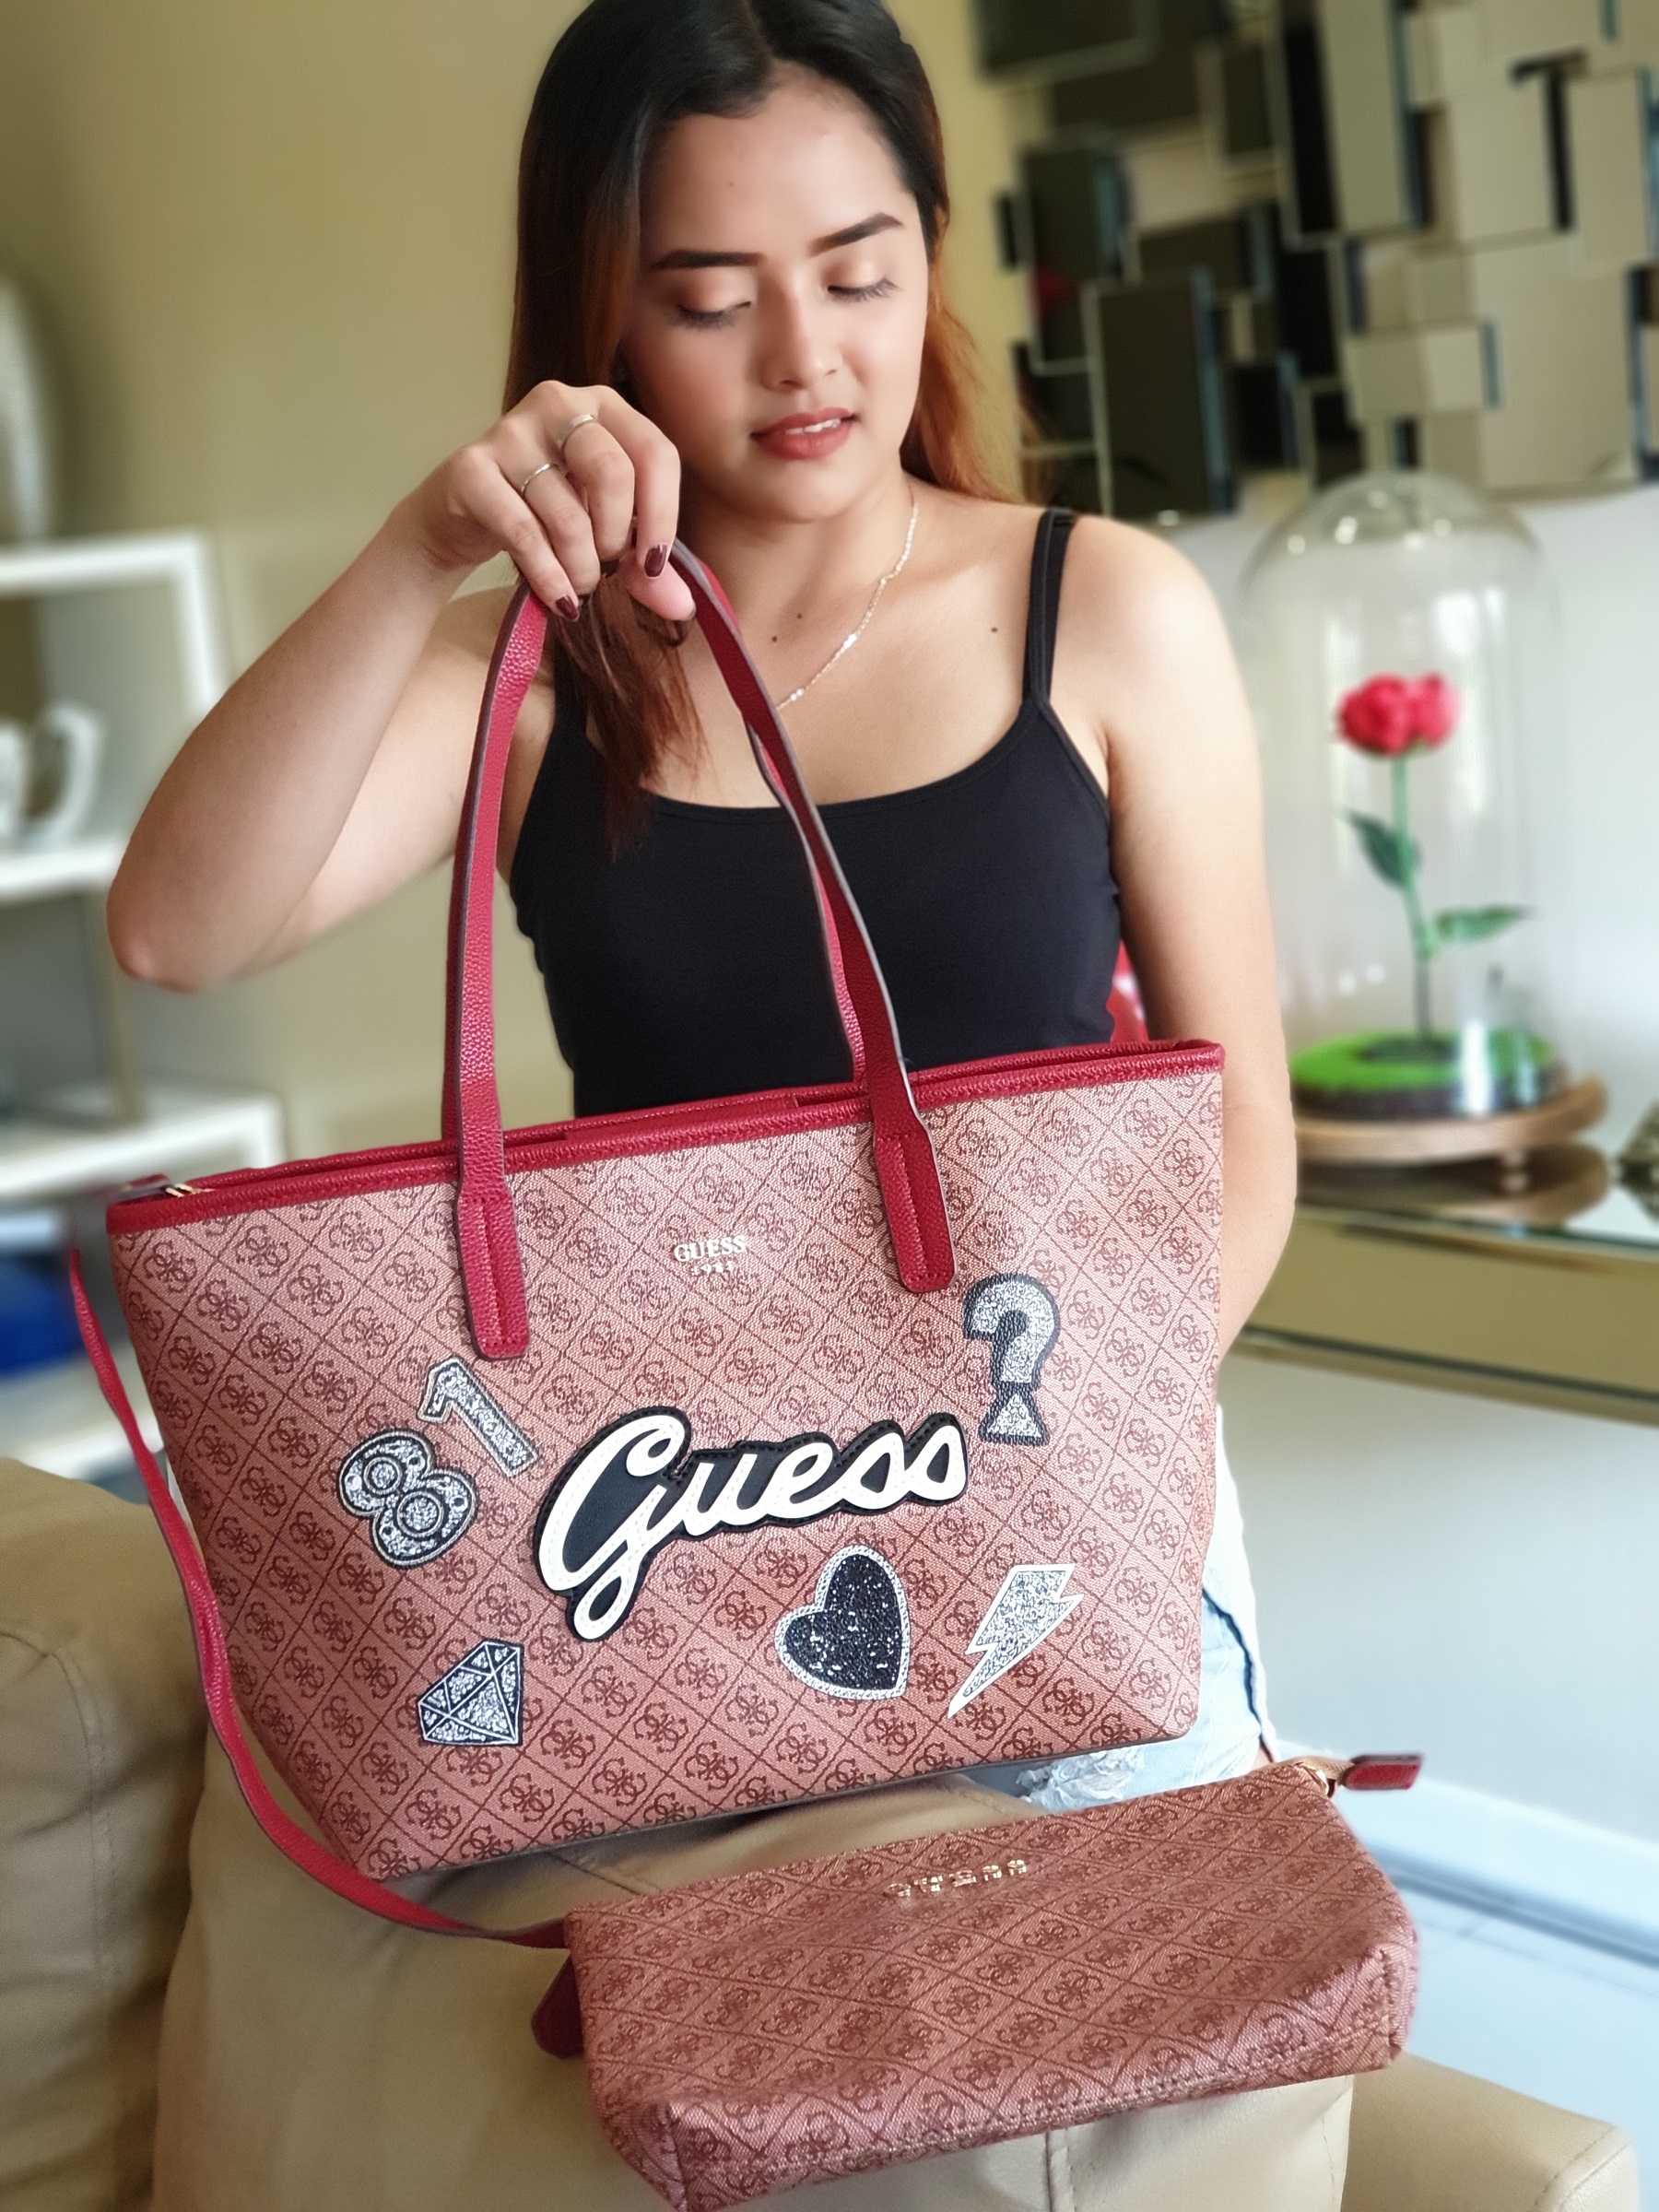 Authentic Guess Women's Classic Tote Bag Vikky 4G Logo in